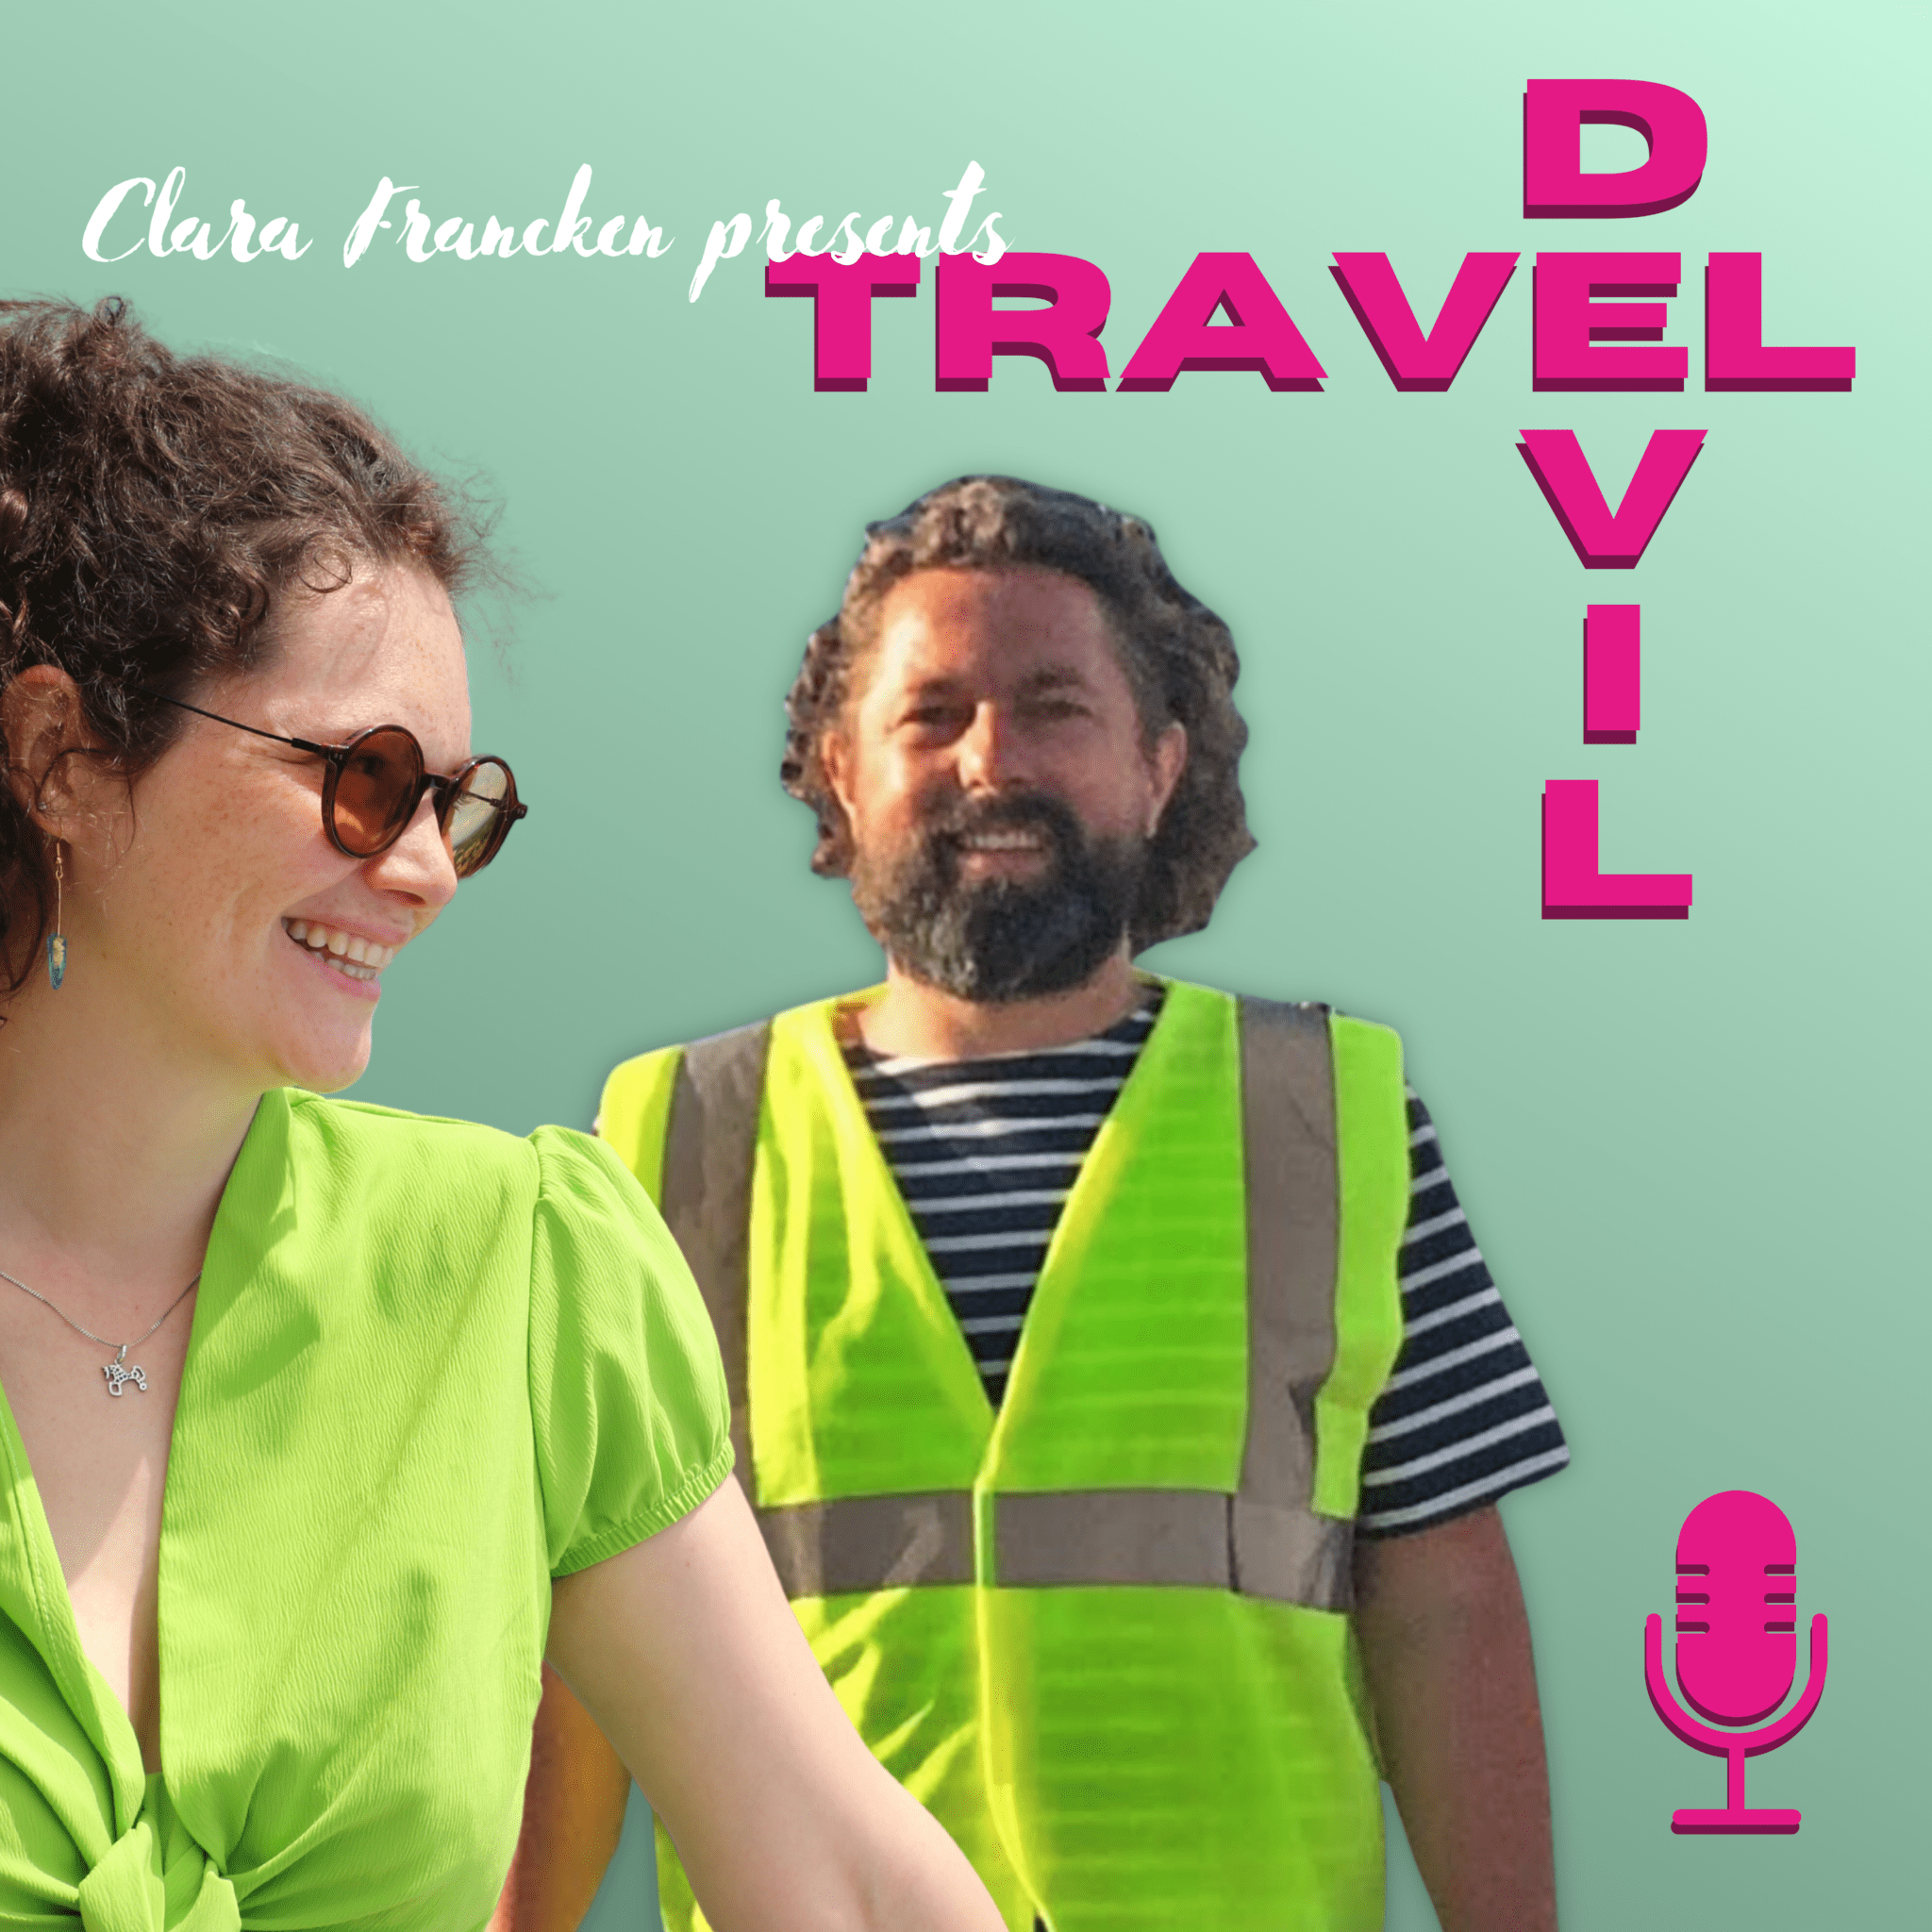 Podcast cover text: Clara Francken presents Travel Devil, image: girl with sunglasses and green tshirt looks to the right, man in the middle is Joris Van Bree and wears a yellow safety vest